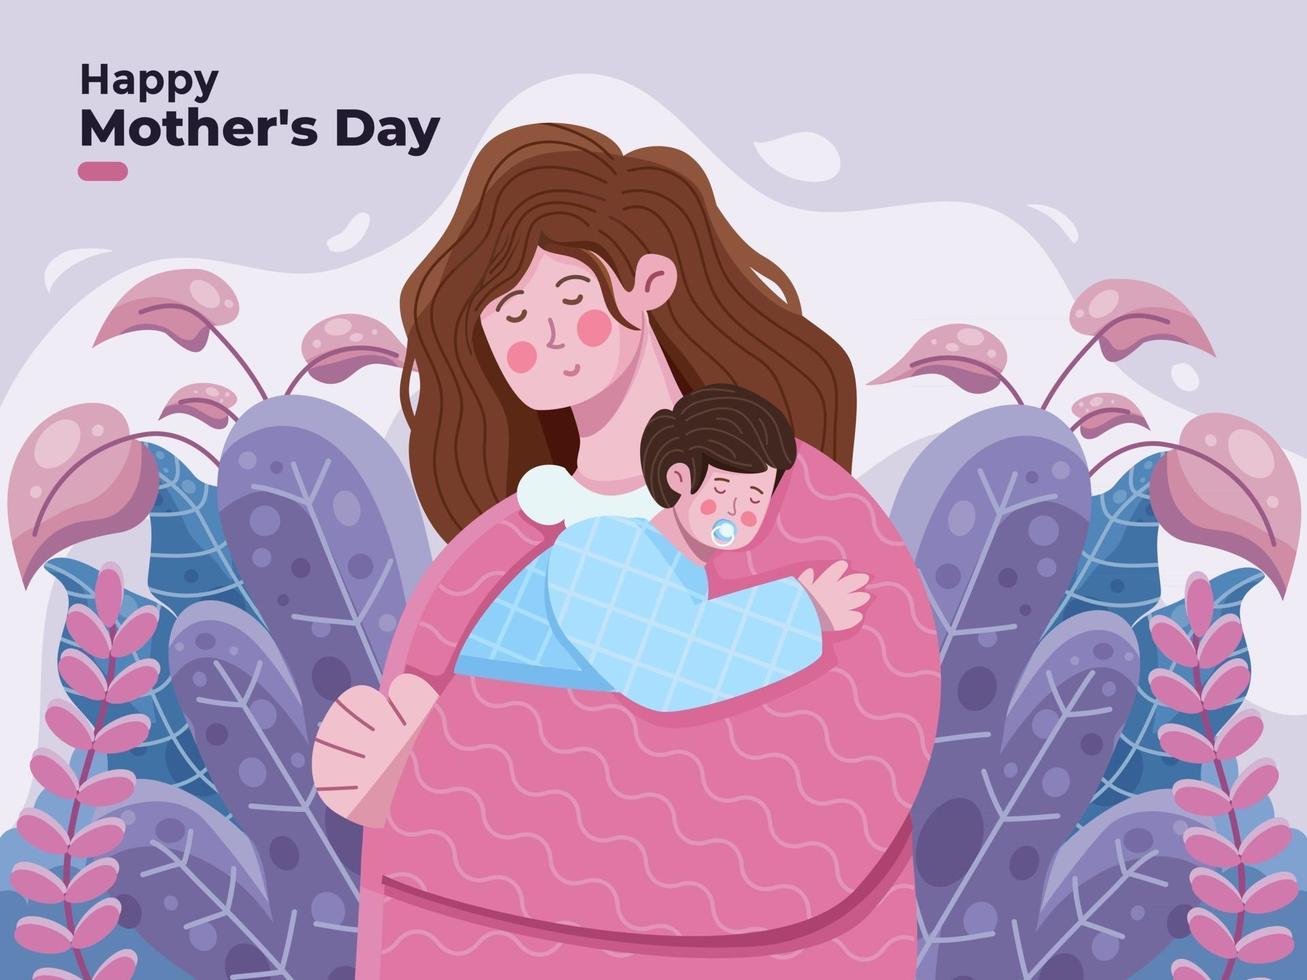 Happy Mothers Day illustration with mom hugging her child with great affection and love. Mother Holding Baby Son In Arms Greeting happy Mothers Day Suitable for banner greeting card postcard banner poster invitation print vector